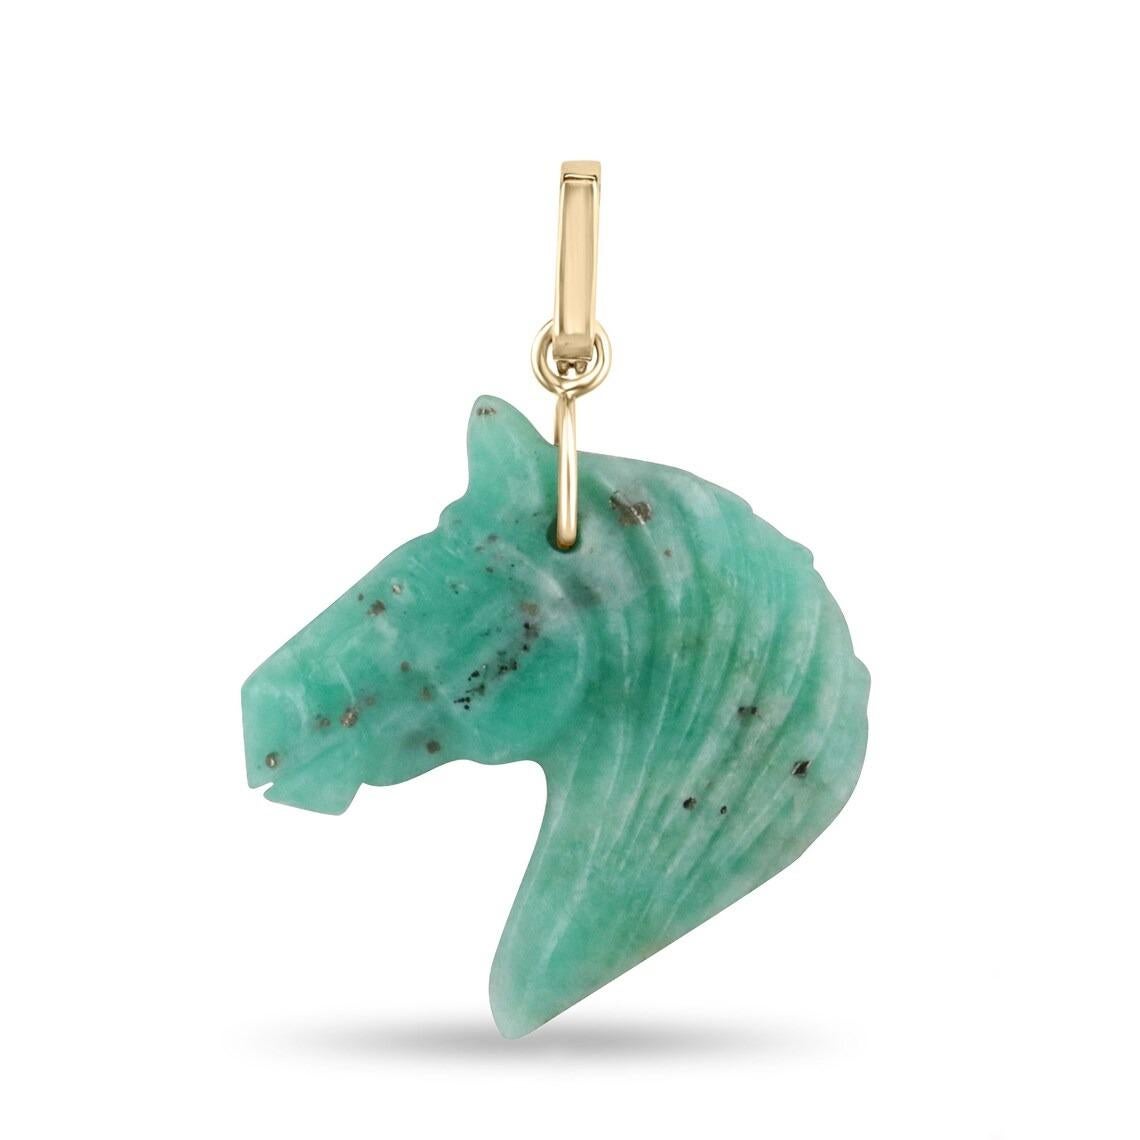 This exquisite hand-carved Colombian emerald rough horse sculpture showcases the raw beauty of emerald, accentuated by delicate touches of calcite, black shale, and gleaming pyrites gold. The horse's elegant side profile is adorned with a 14k gold